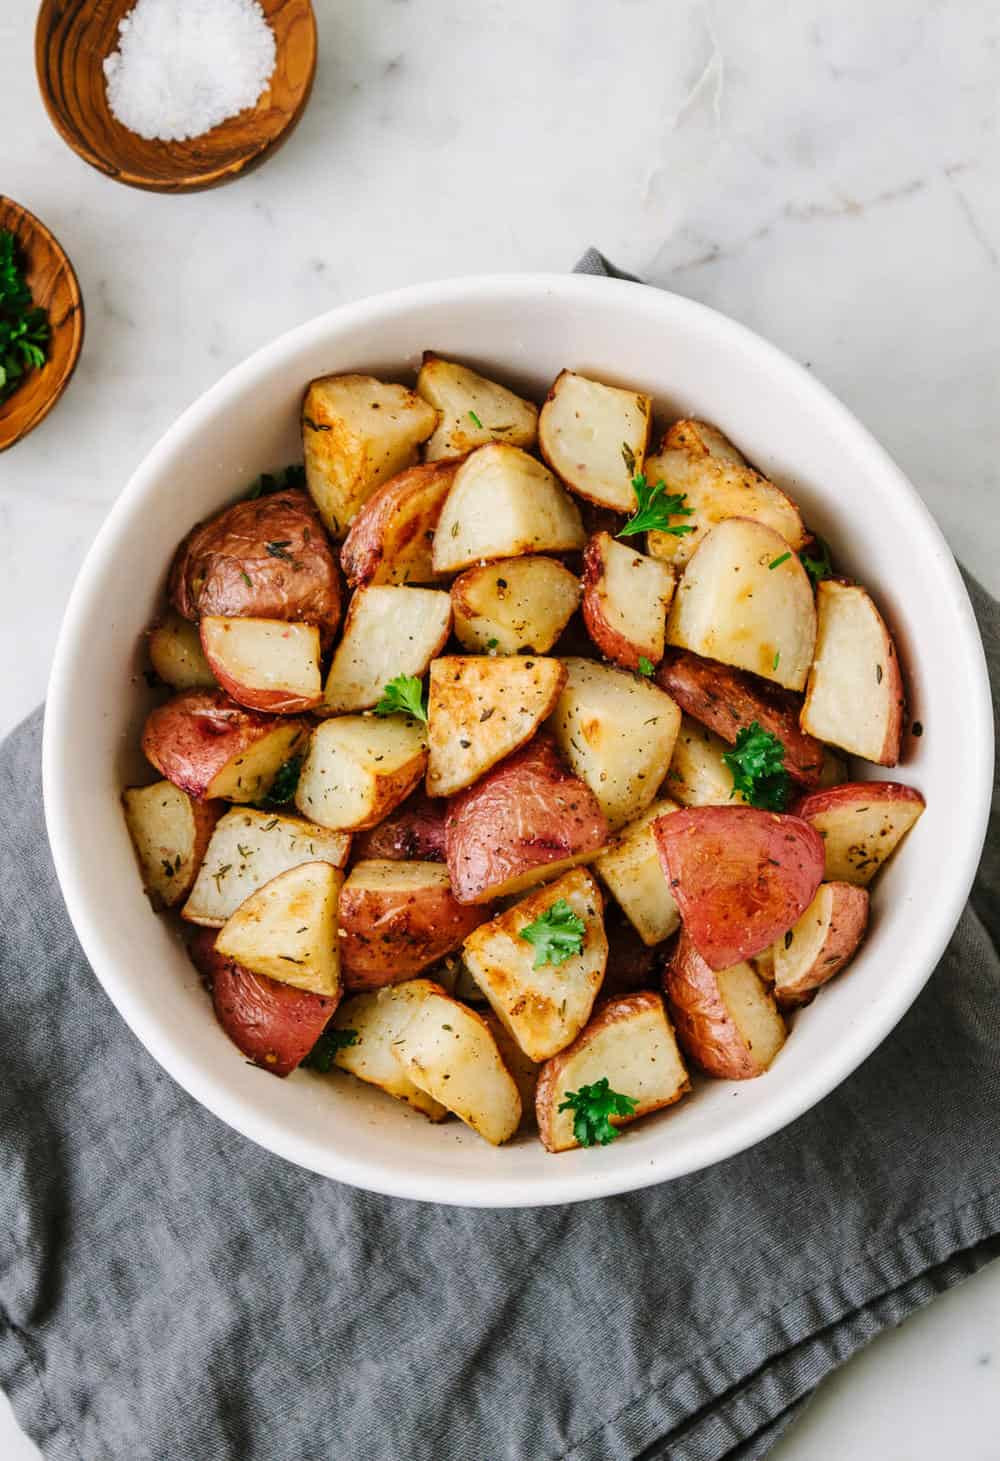 Red Roasted Potatoes
 EASY OVEN ROASTED RED POTATOES THE SIMPLE VEGANISTA